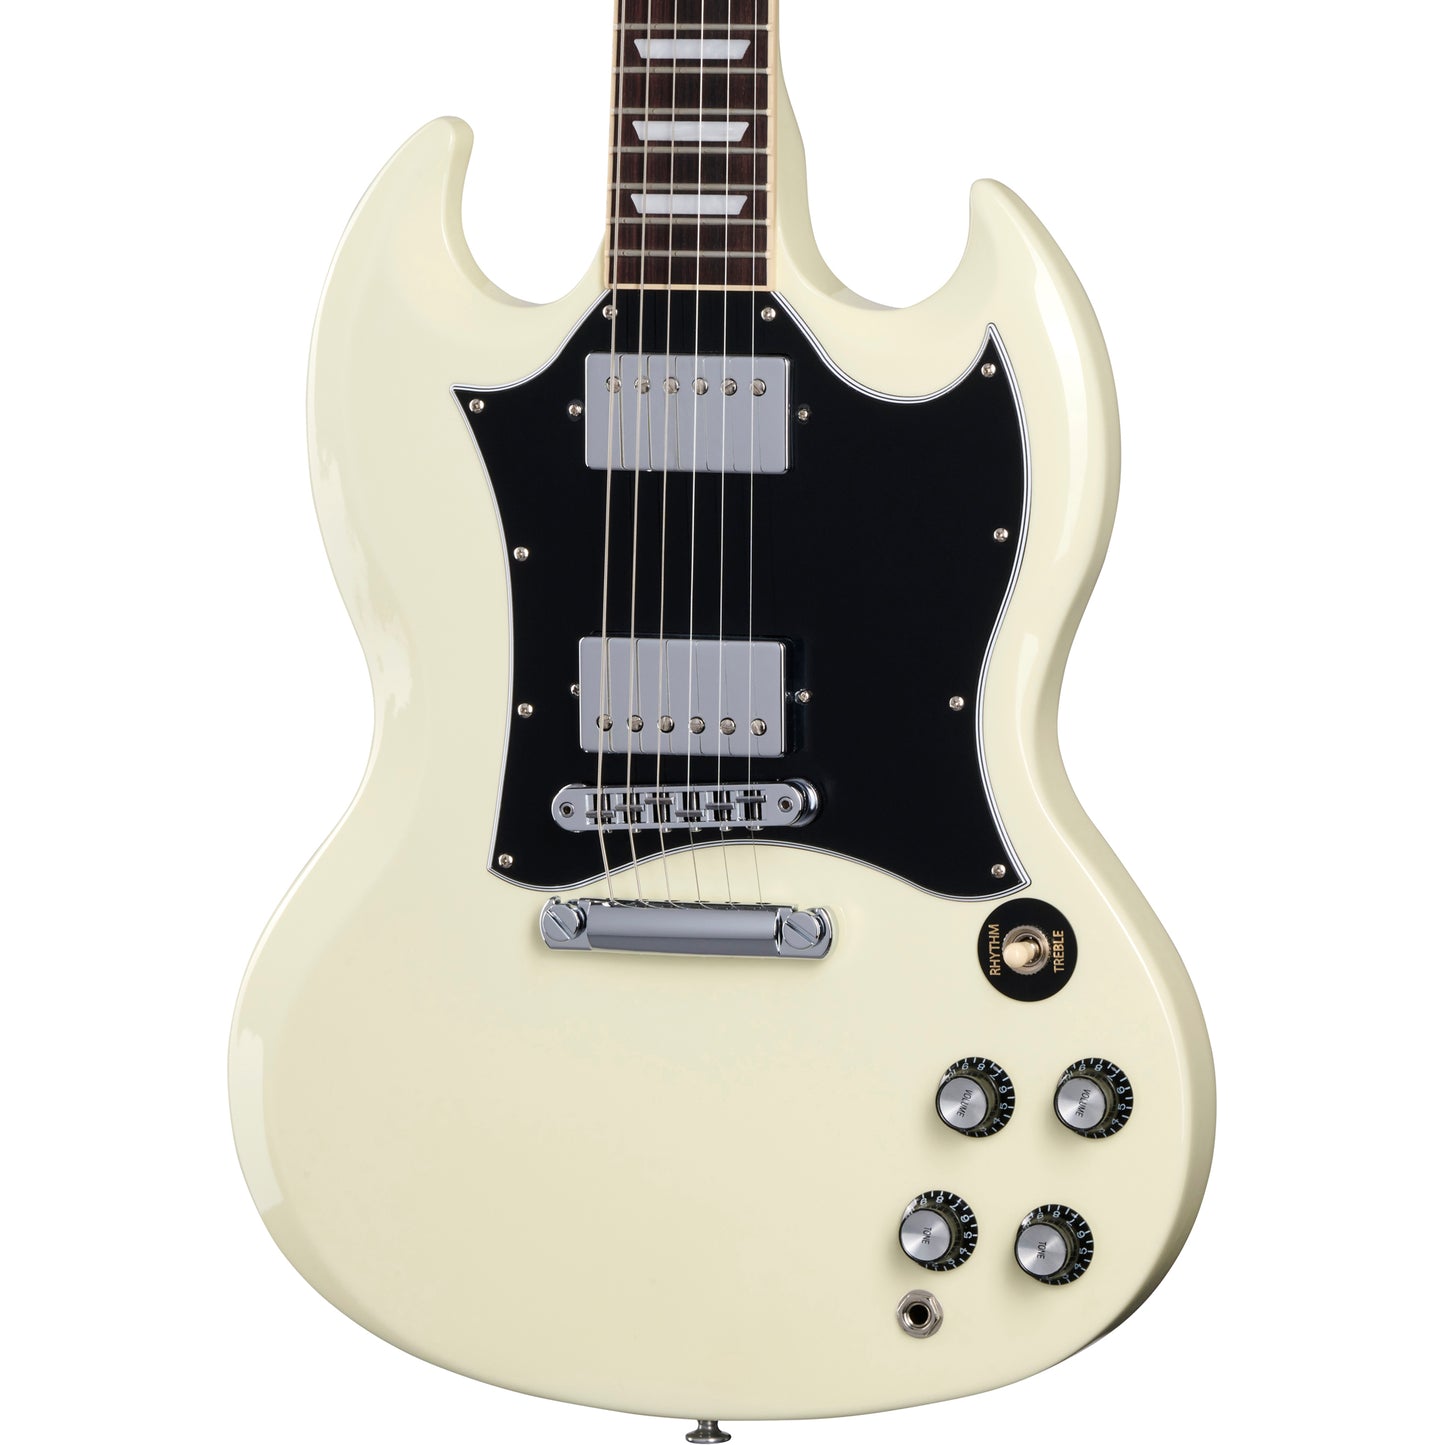 Gibson SG Standard Electric Guitar - Classic White